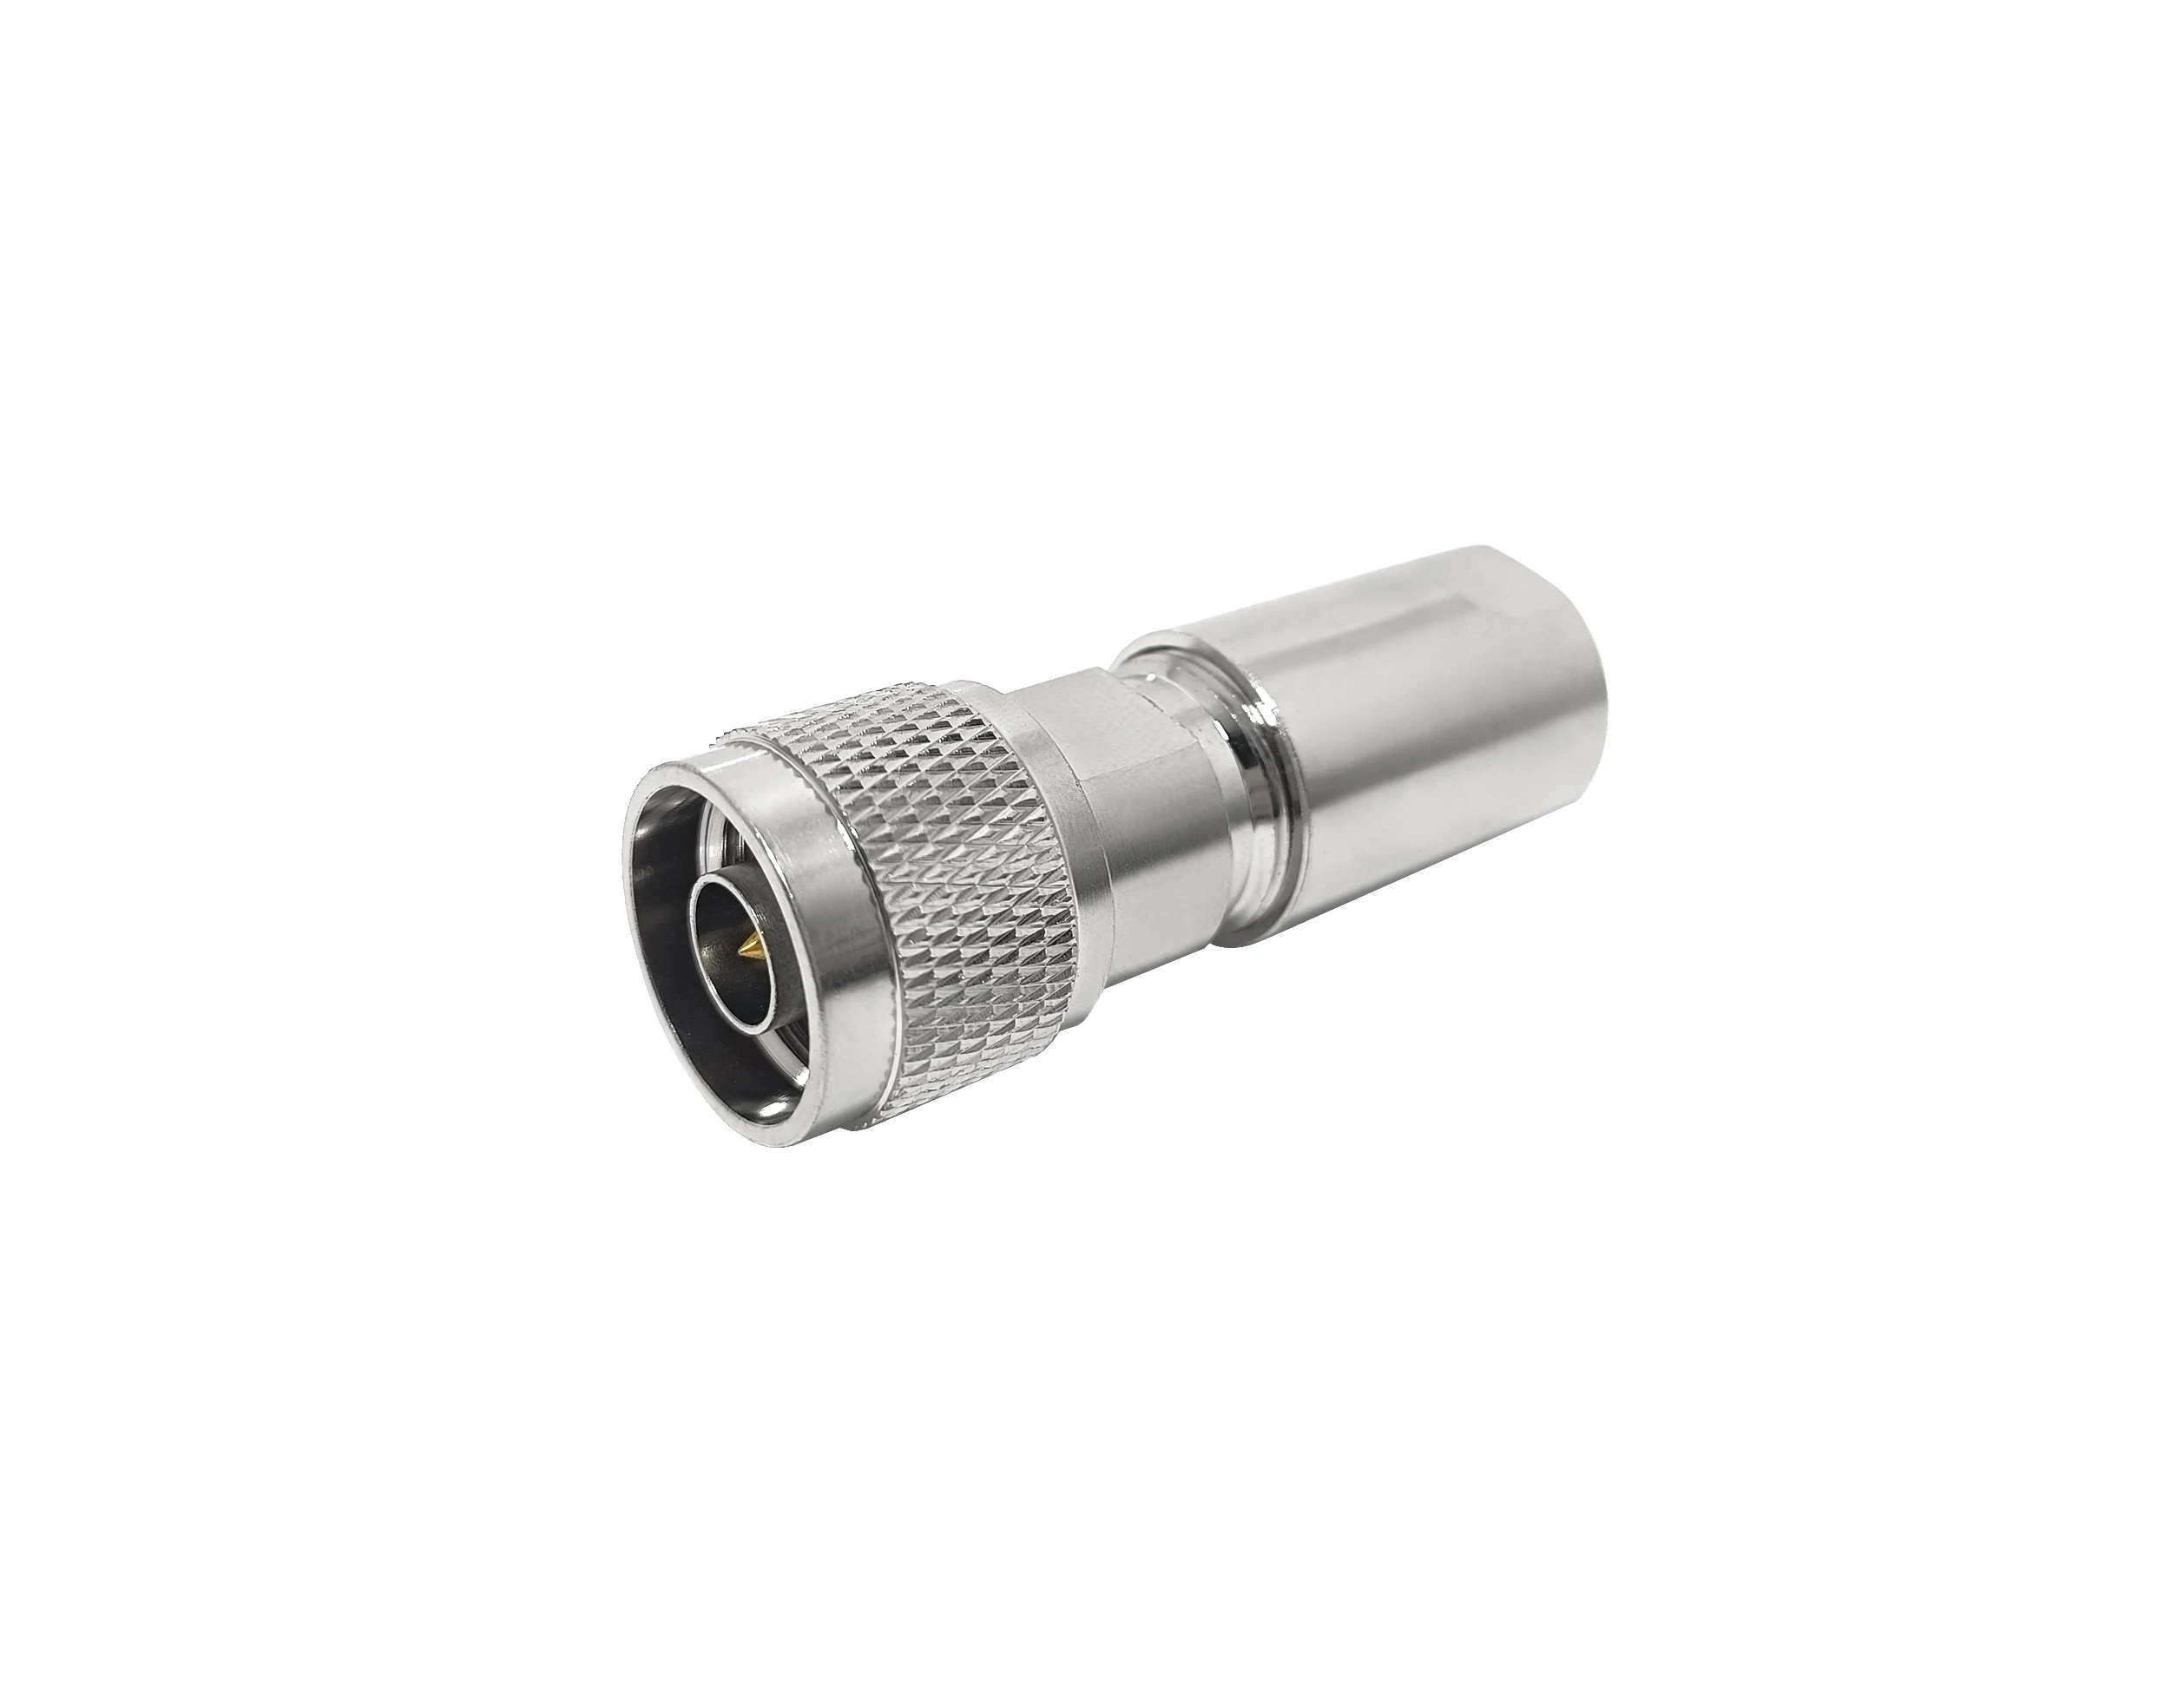 RF Coaxial LMR400 RG8 with Clamp N Type Plug Connector factory